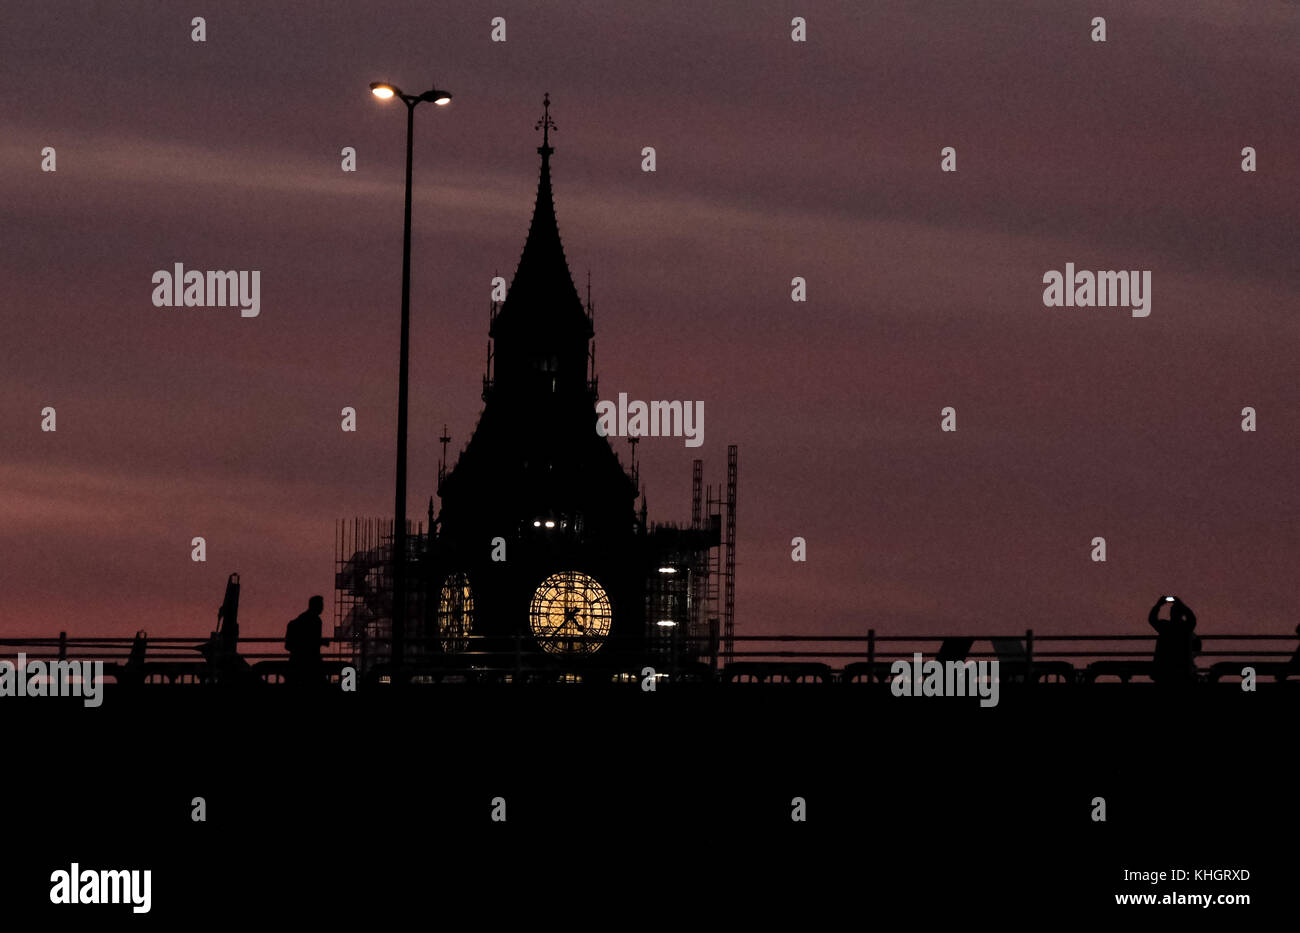 Friday 17th November 2017. London England. London is greeted with a wonderful sunset to mark the end of Friday as commuters come out of work and stop to photograph the spectacle. The gent to right frames Elizabeth Tower( Big Ben) and snaps a picture on his mobile phone as the the clock face peeks out from the scaffolding surrounding the tower. Paul Watts/ Alamy live news Stock Photo